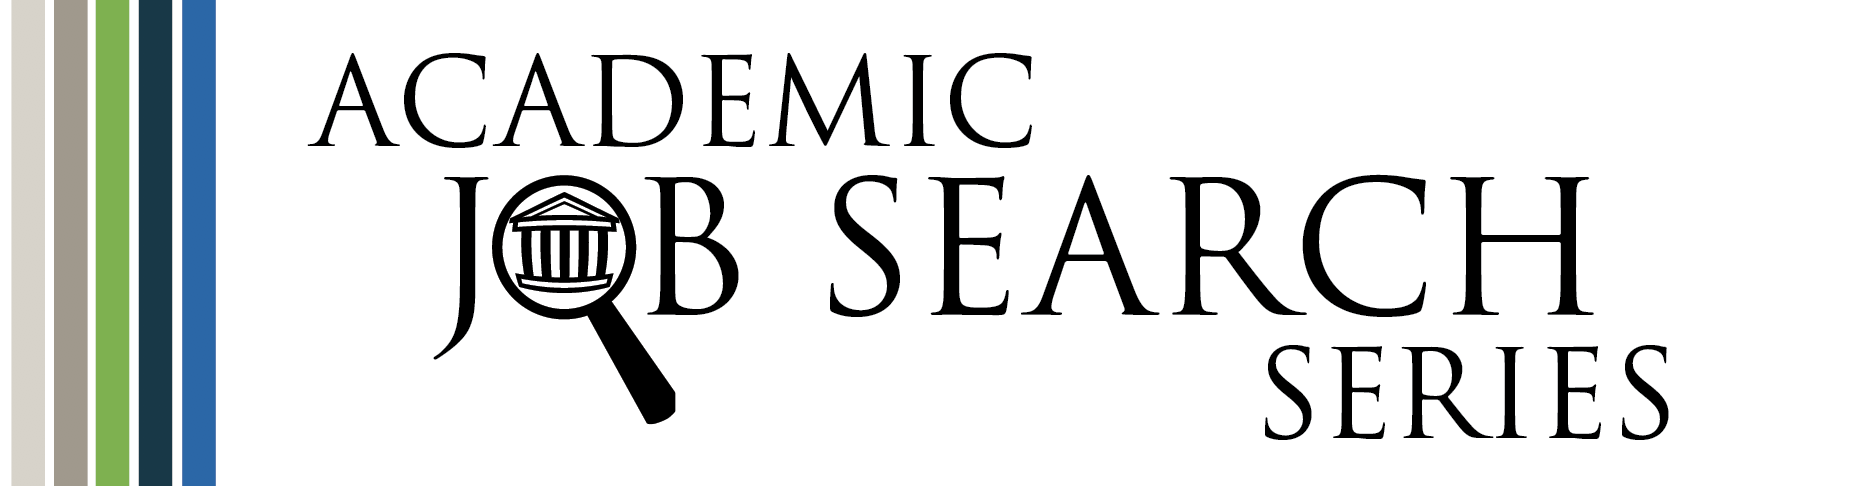 Academic Job Search Series logo--colorful lines in shades of gray, green, and blue with the series title in which the "O" in "job" is a magnifying glass hovering over the graphic of an institution